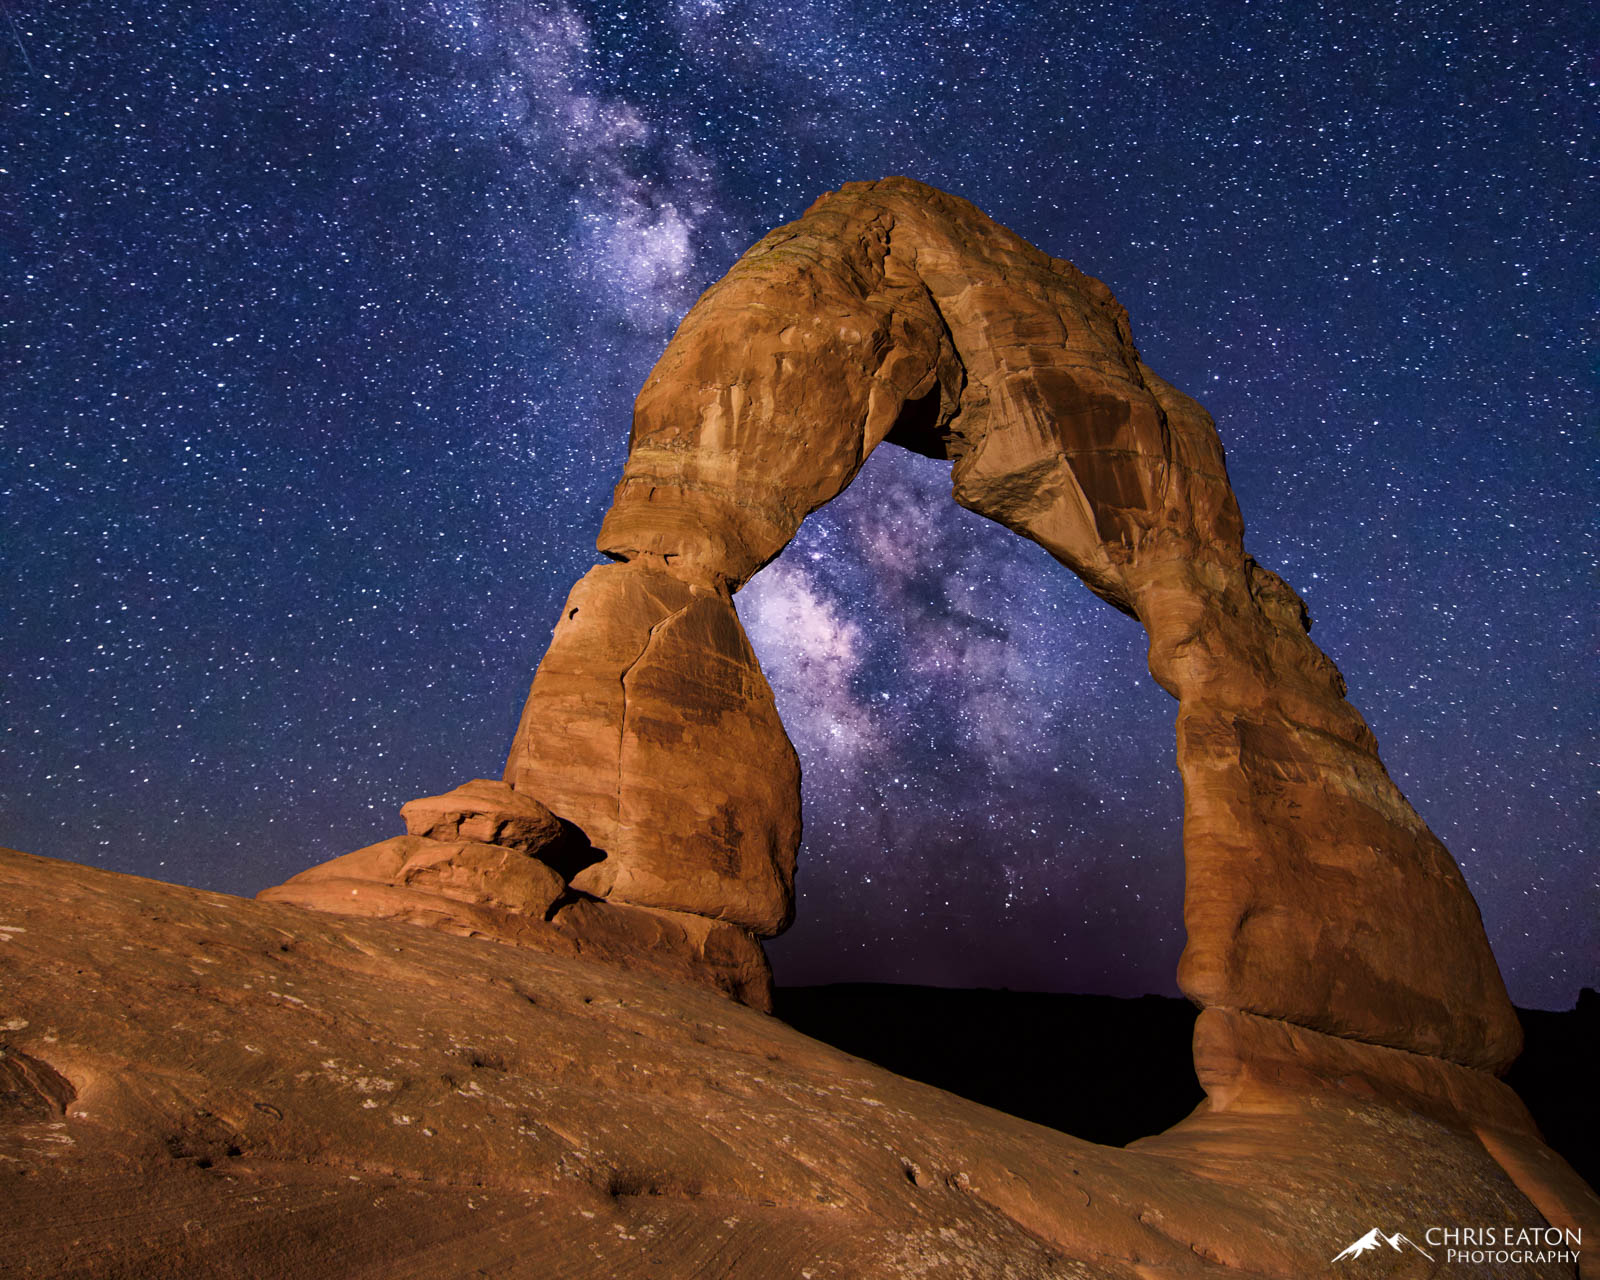 The center of our Milky Way galaxy shines brightly through Delicate Arch in Arches National Park.